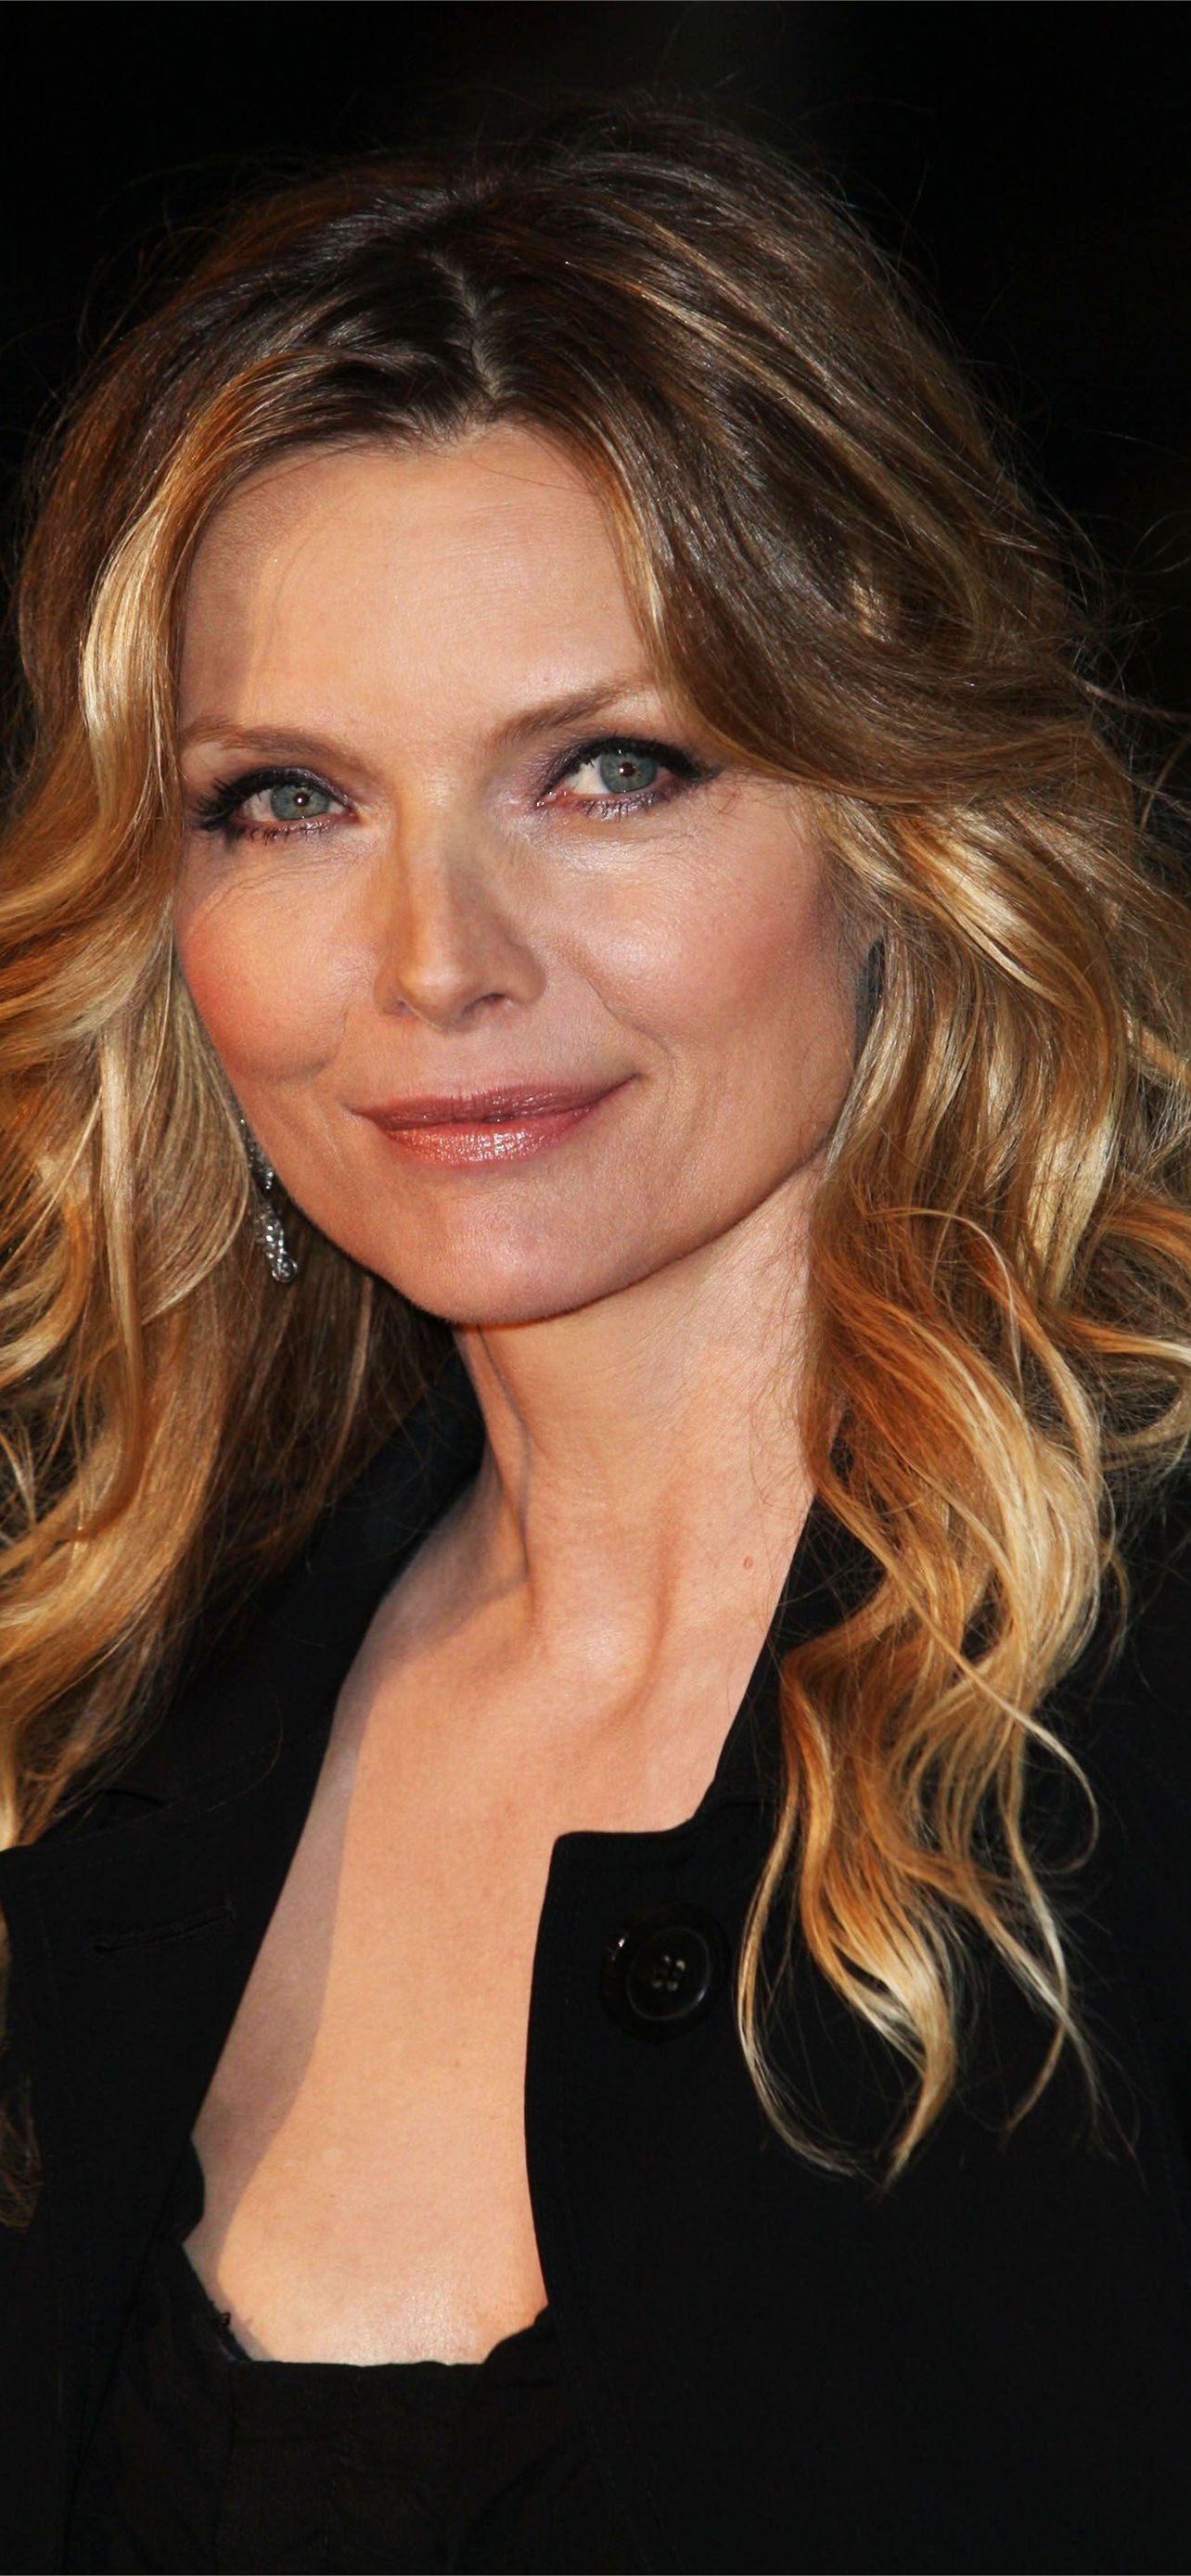 Latest iPhone wallpapers, Free HD wallpapers, Michelle Pfeiffer, 1290x2780 HD Handy